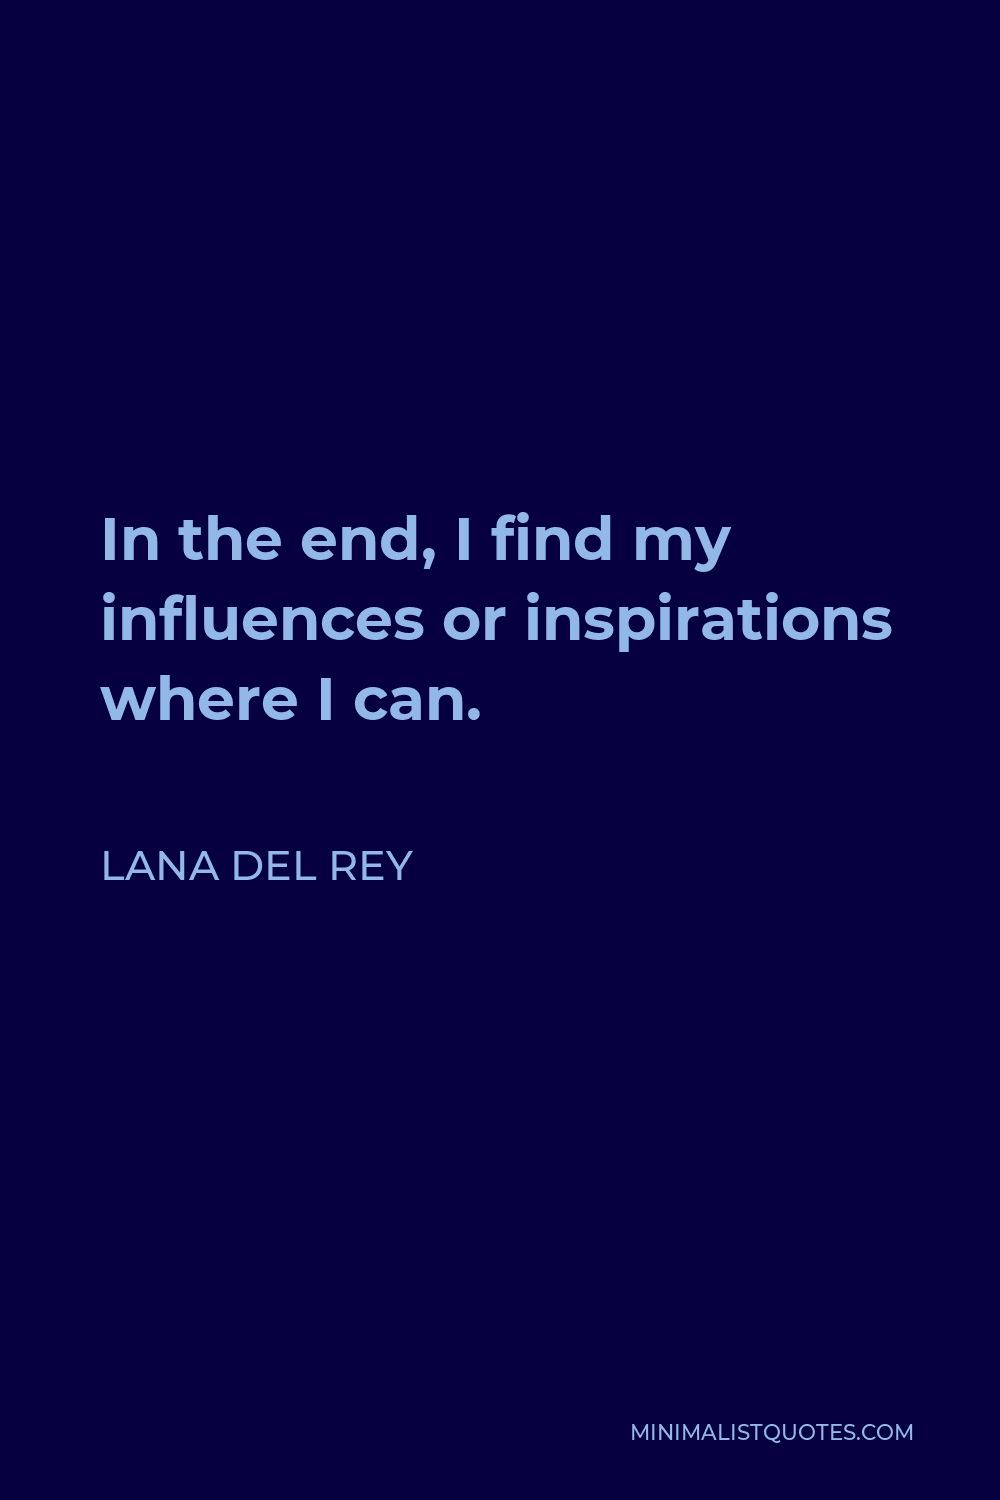 Lana Del Rey Quote - In the end, I find my influences or inspirations where I can.